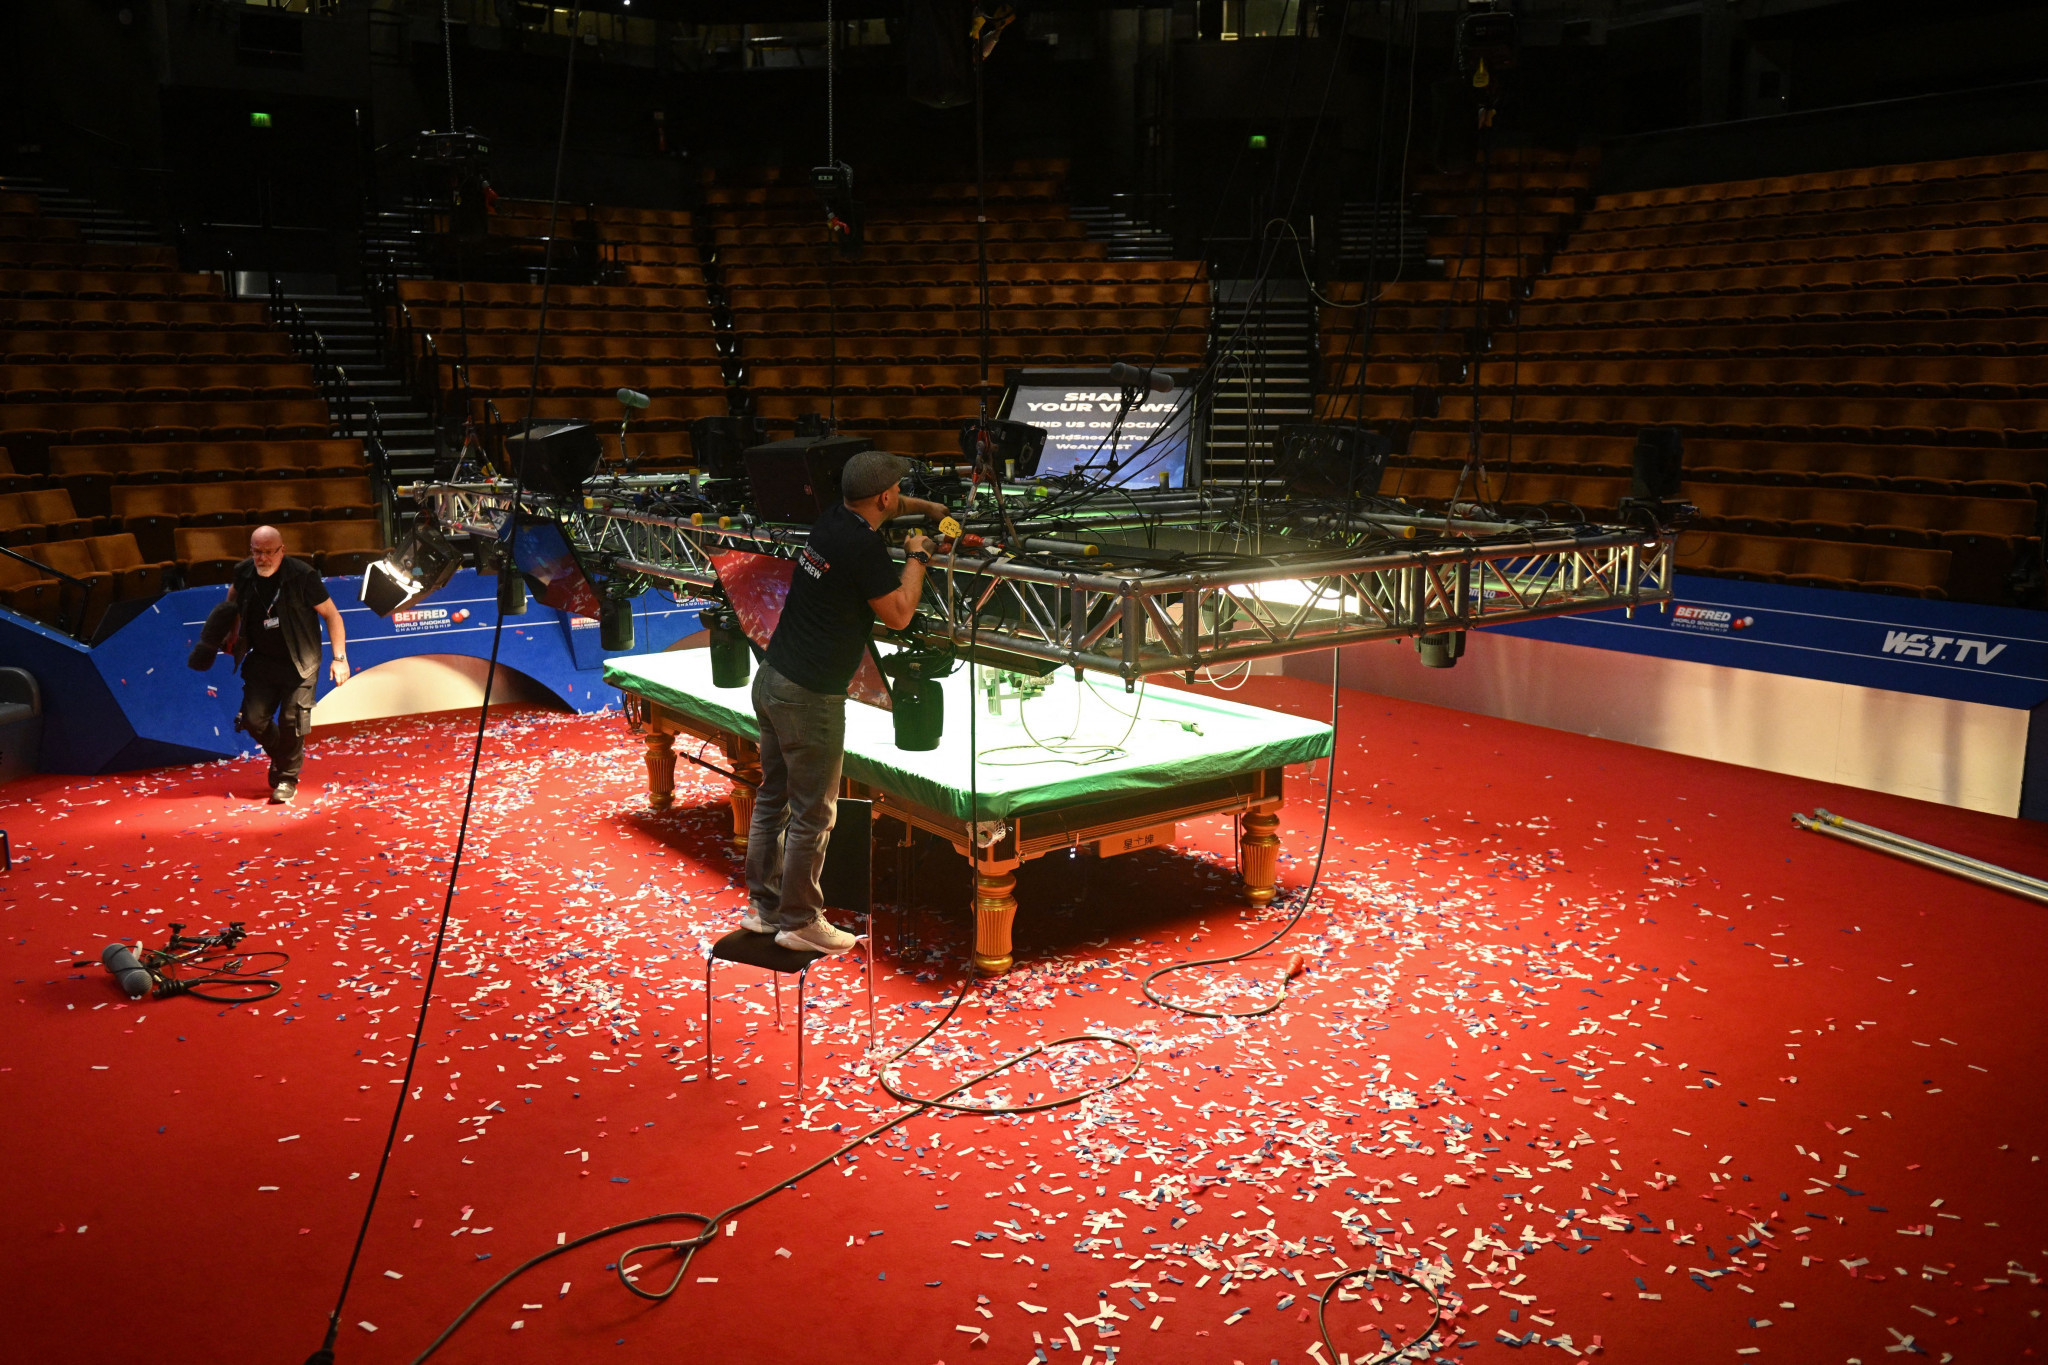 Play has been suspended at the World Snooker Championship after a protest by members of Just Stop Oil ©Getty Images